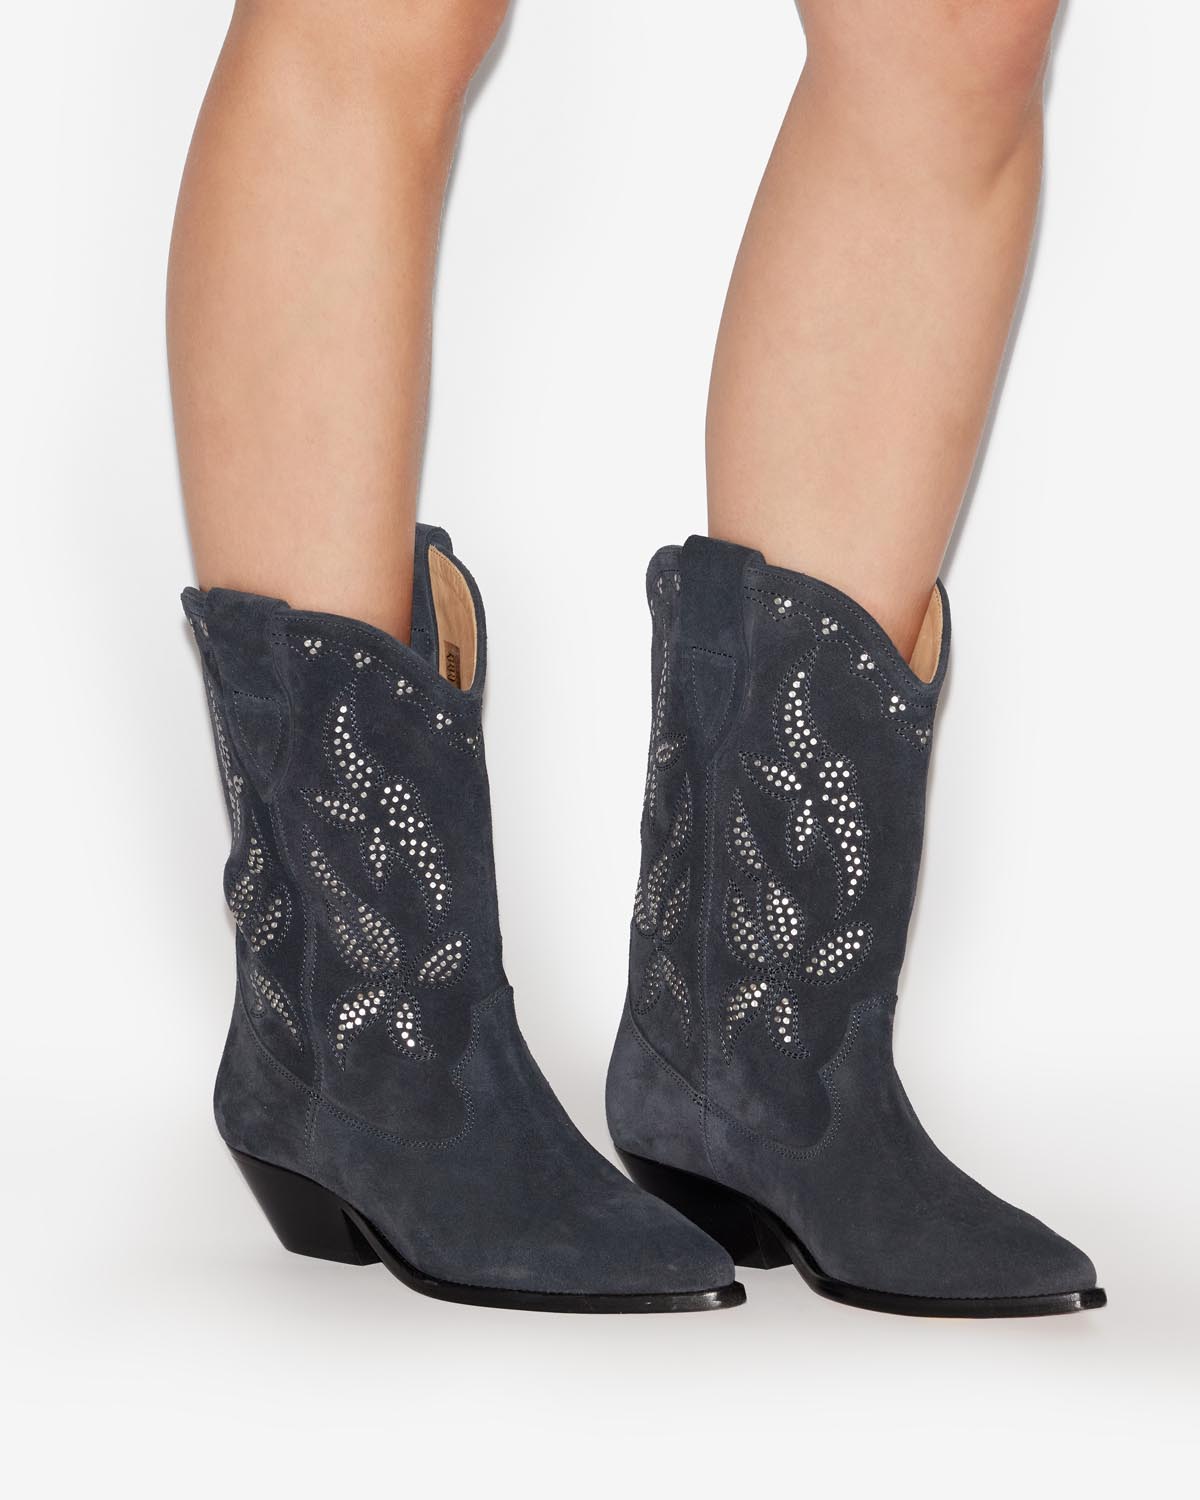 Boots duerto Woman Faded black-silver 3